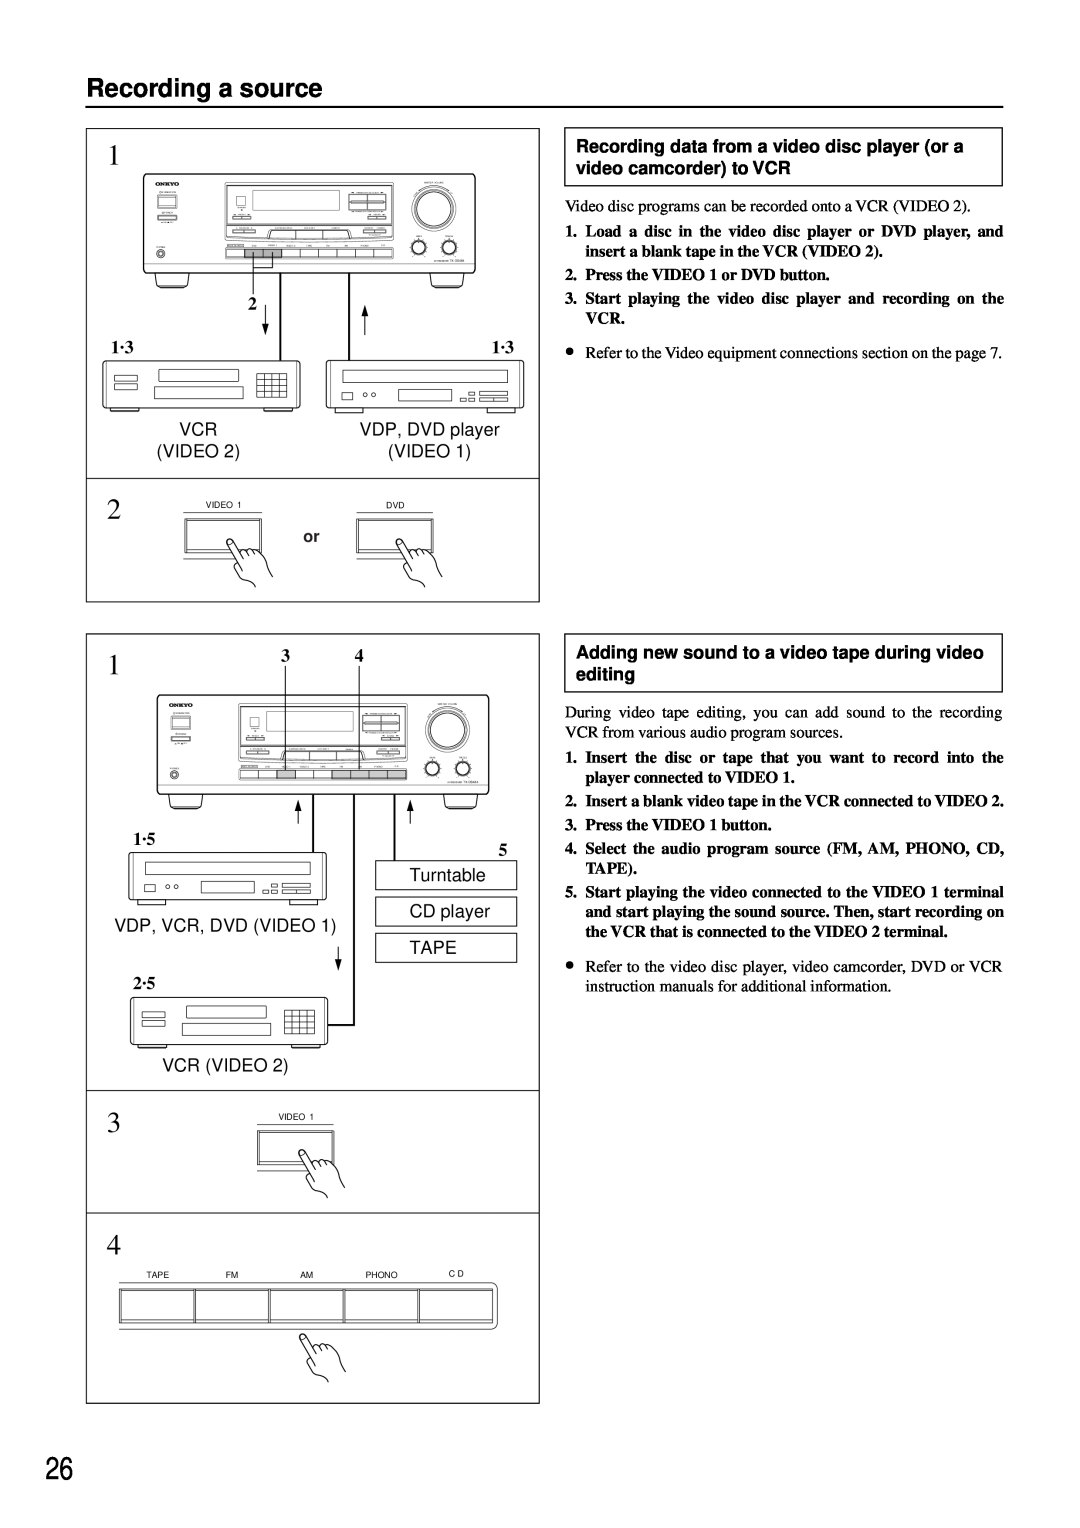 Onkyo TX-DS484 instruction manual Recording a source 